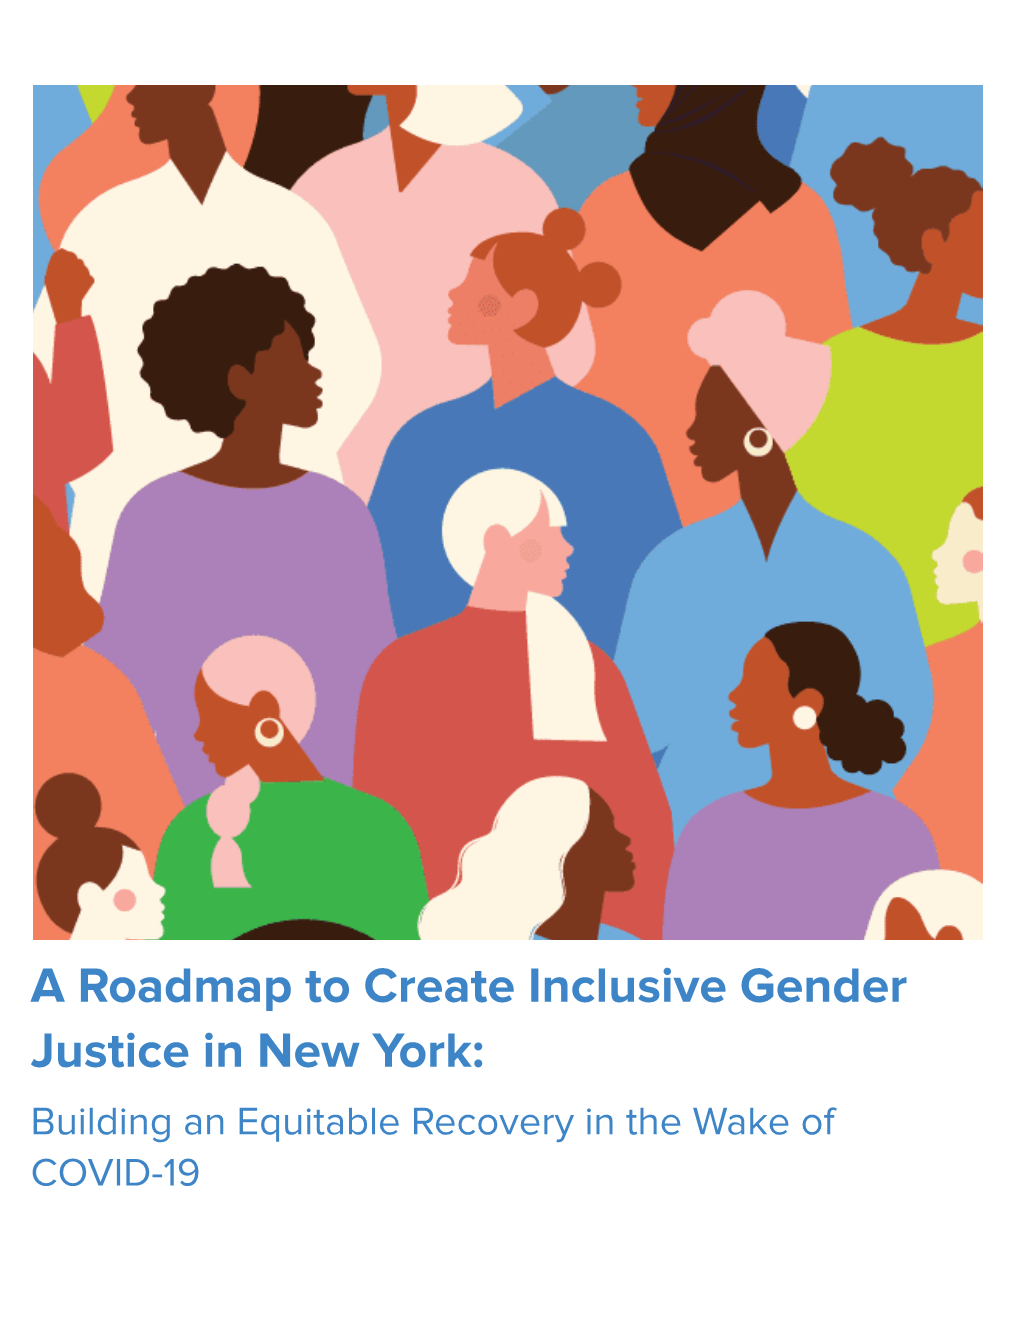 A Roadmap to Create Inclusive Gender Justice in New York: Building an Equitable Recovery in the Wake of COVID-19